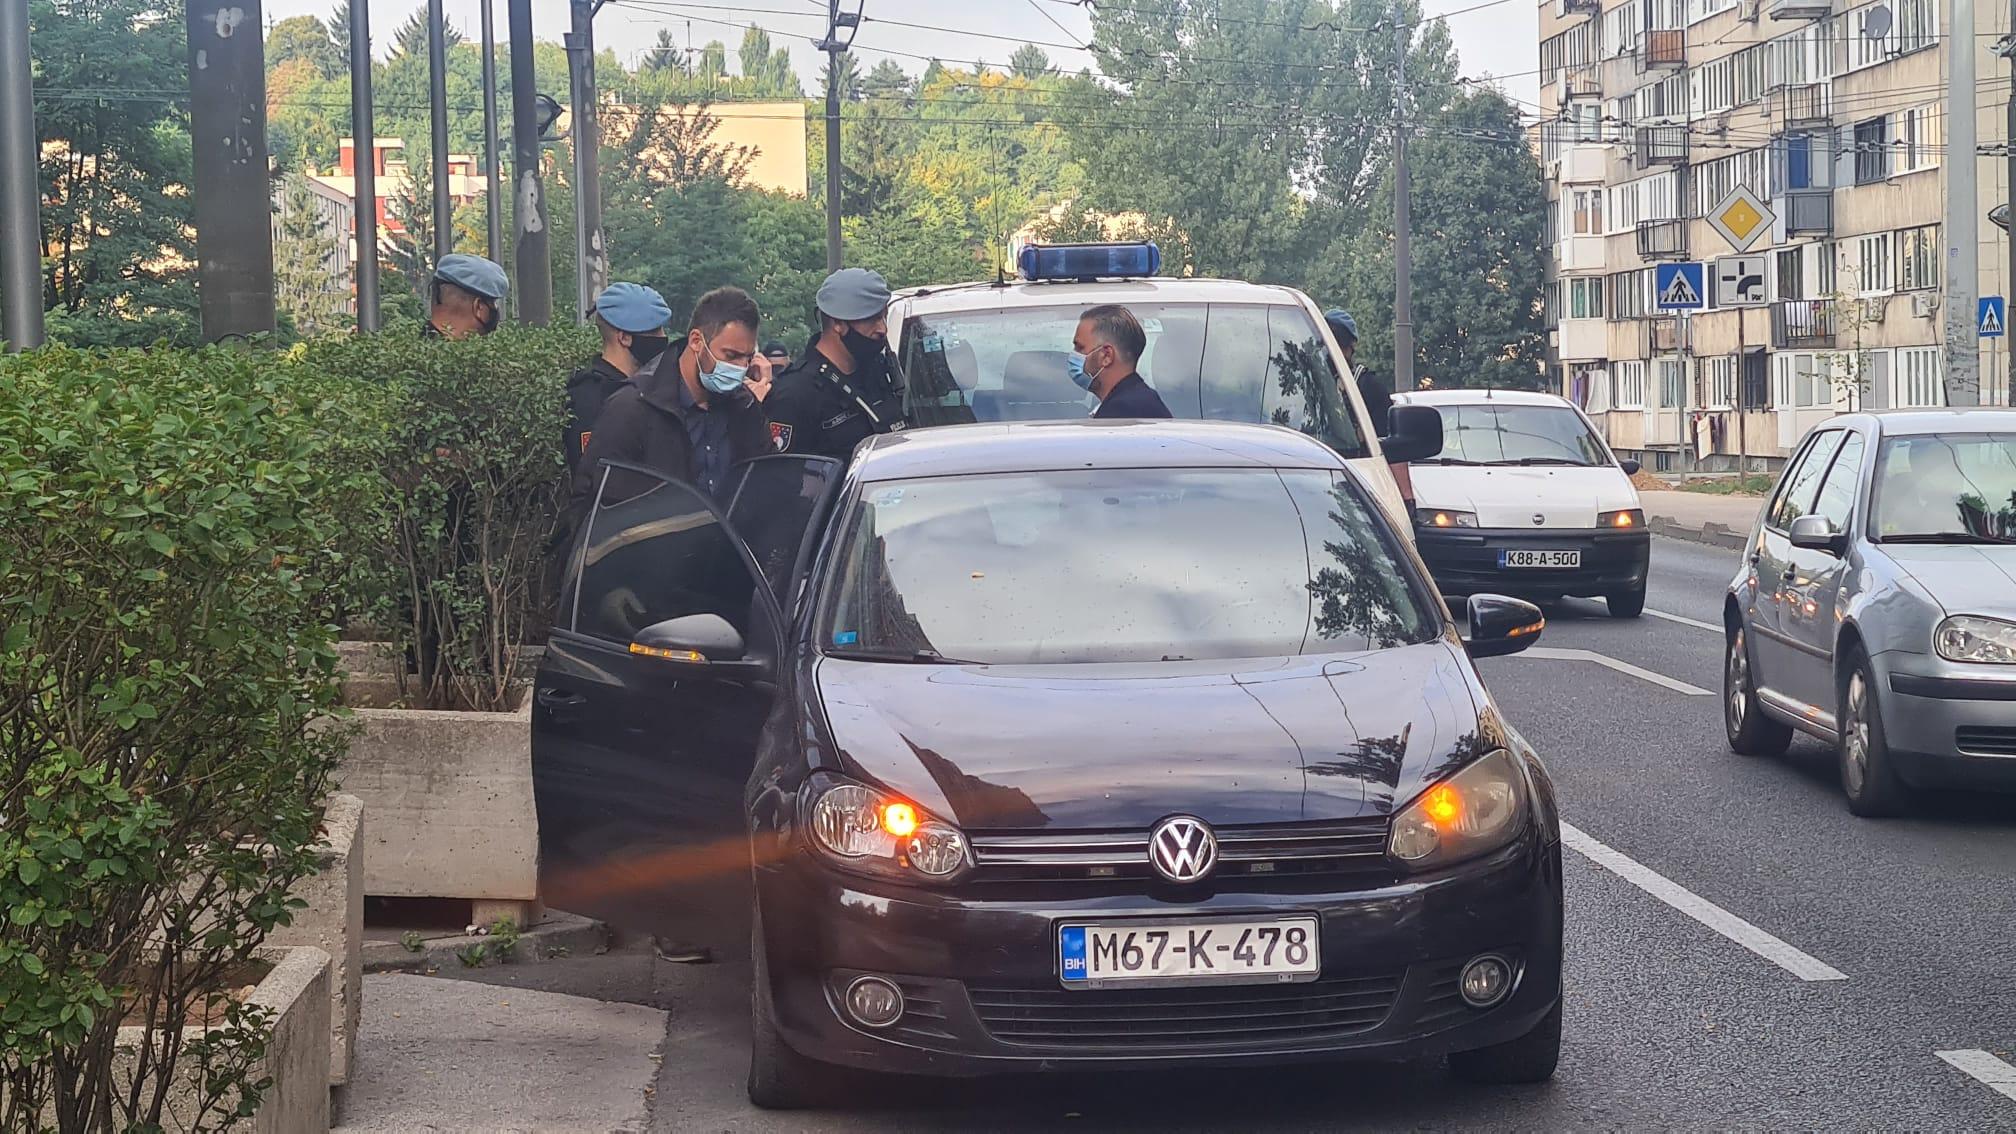 "Avaz" on the spot: The search in Bosmal is over, look at what the police took from Budnjo's apartment